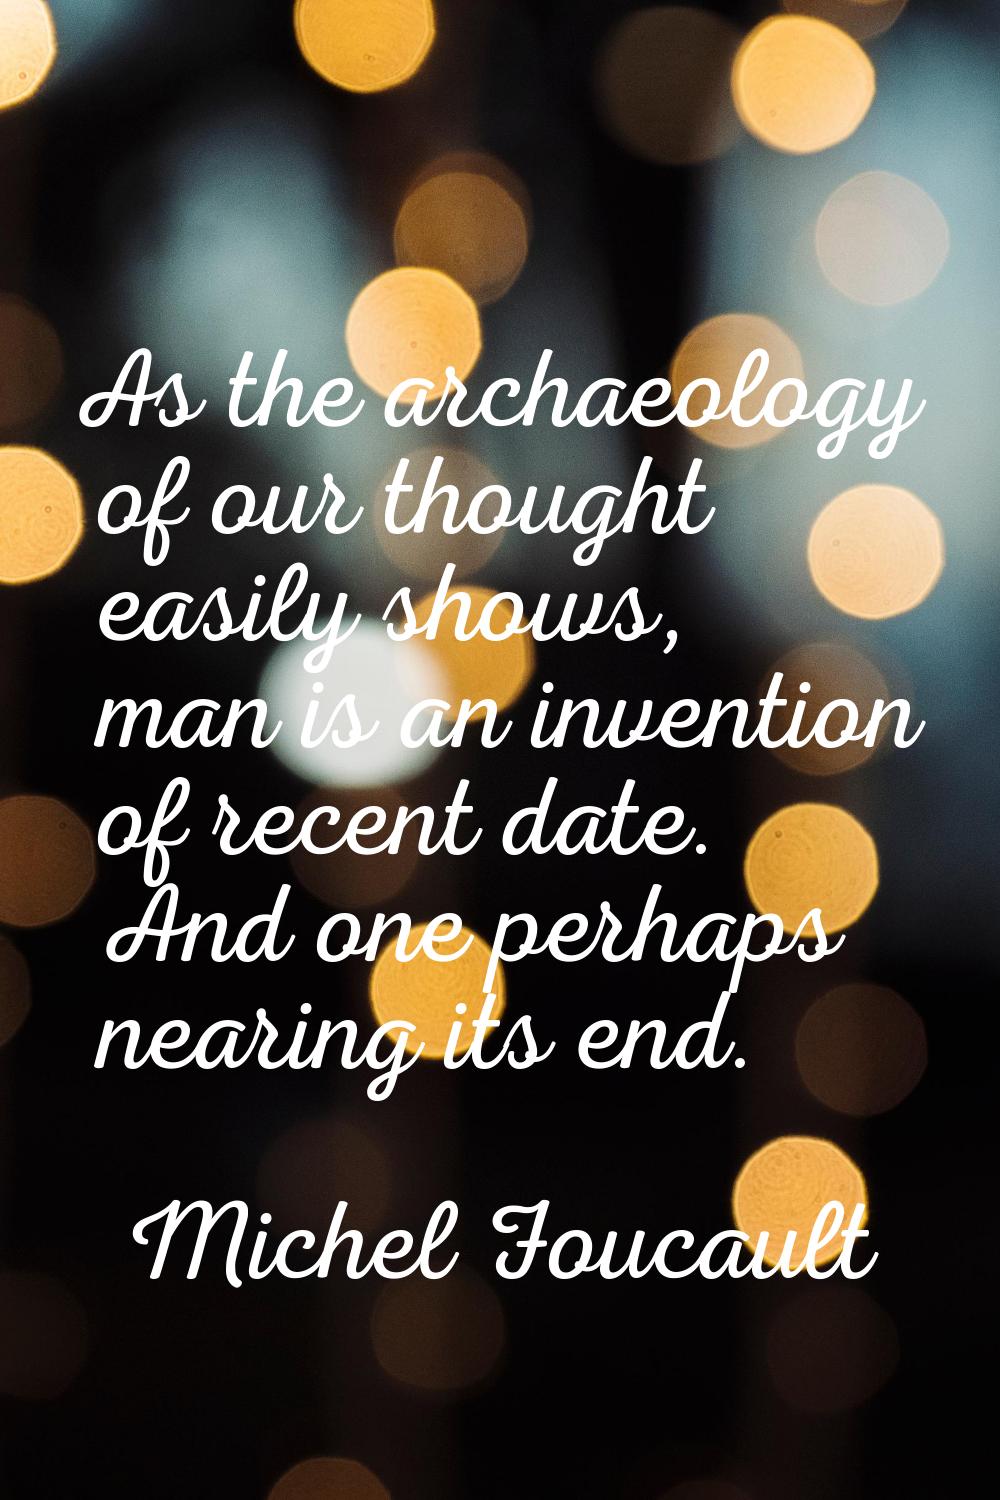 As the archaeology of our thought easily shows, man is an invention of recent date. And one perhaps